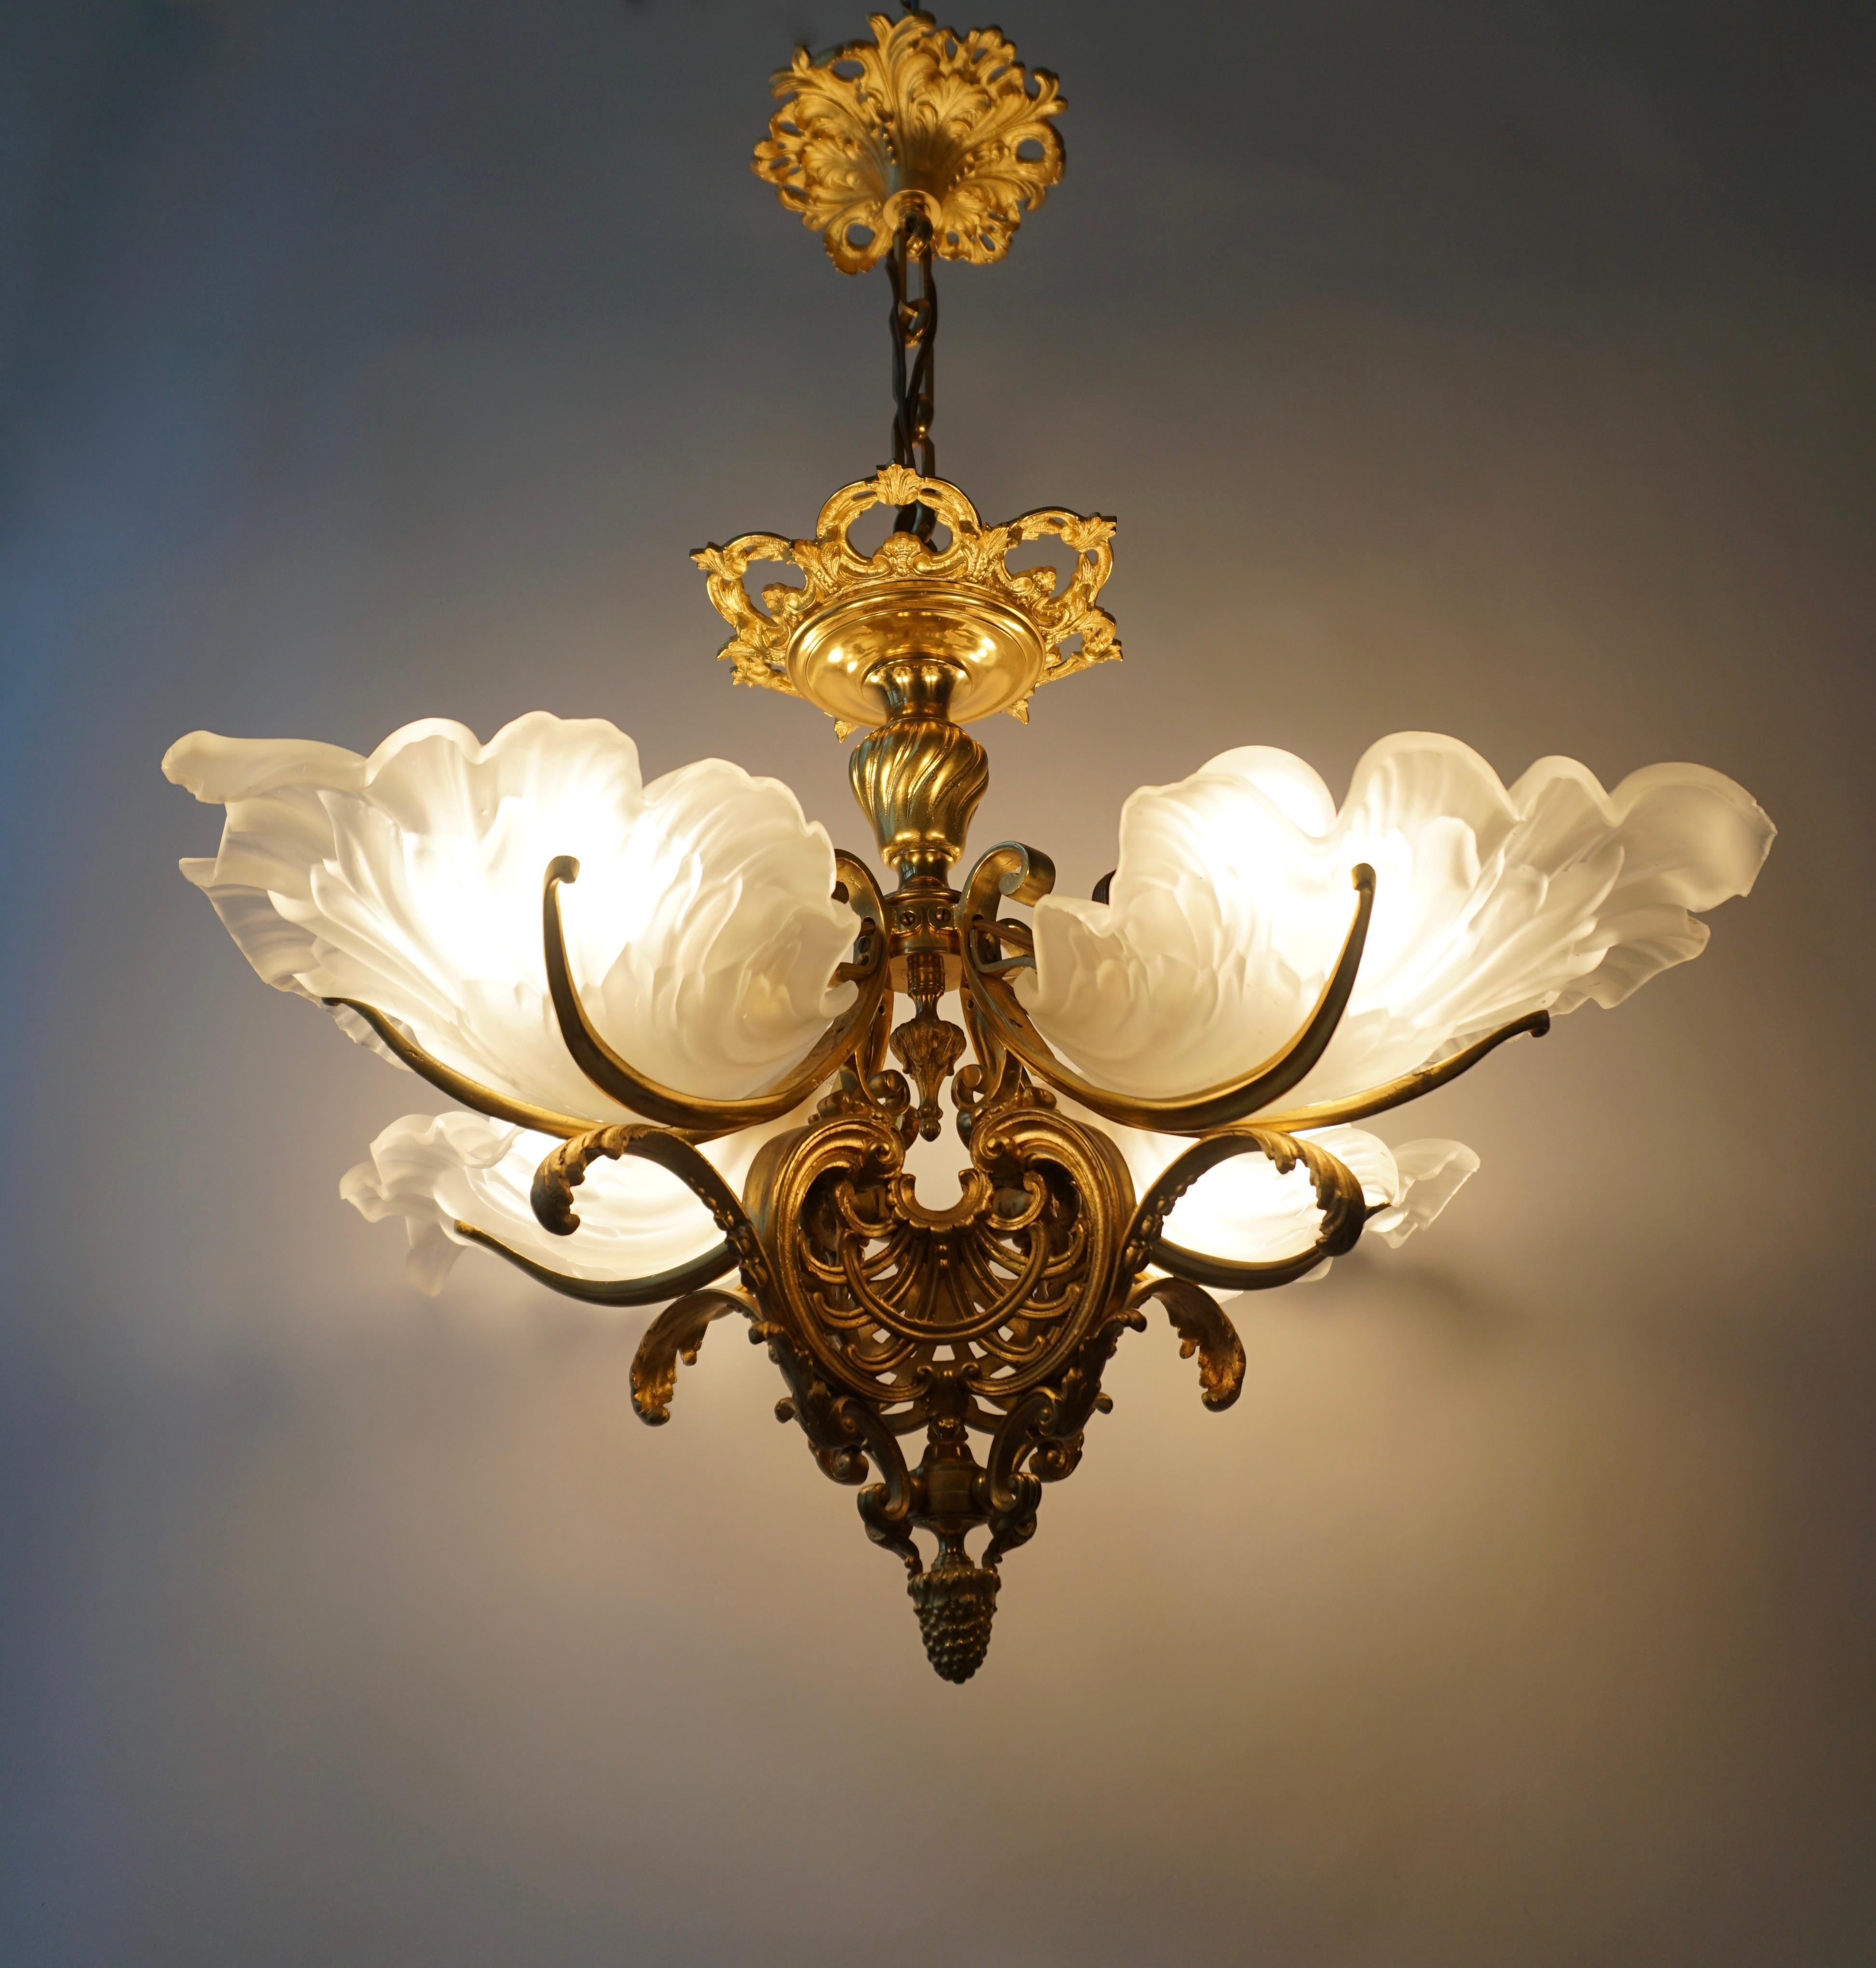 French Louis XVI style gilt bronze and frosted glass chandelier with original gilding.The light created by this chandelier is very pleasant and ambient.
The light requires eight single E27 screw fit lightbulbs (60Watt max.) LED